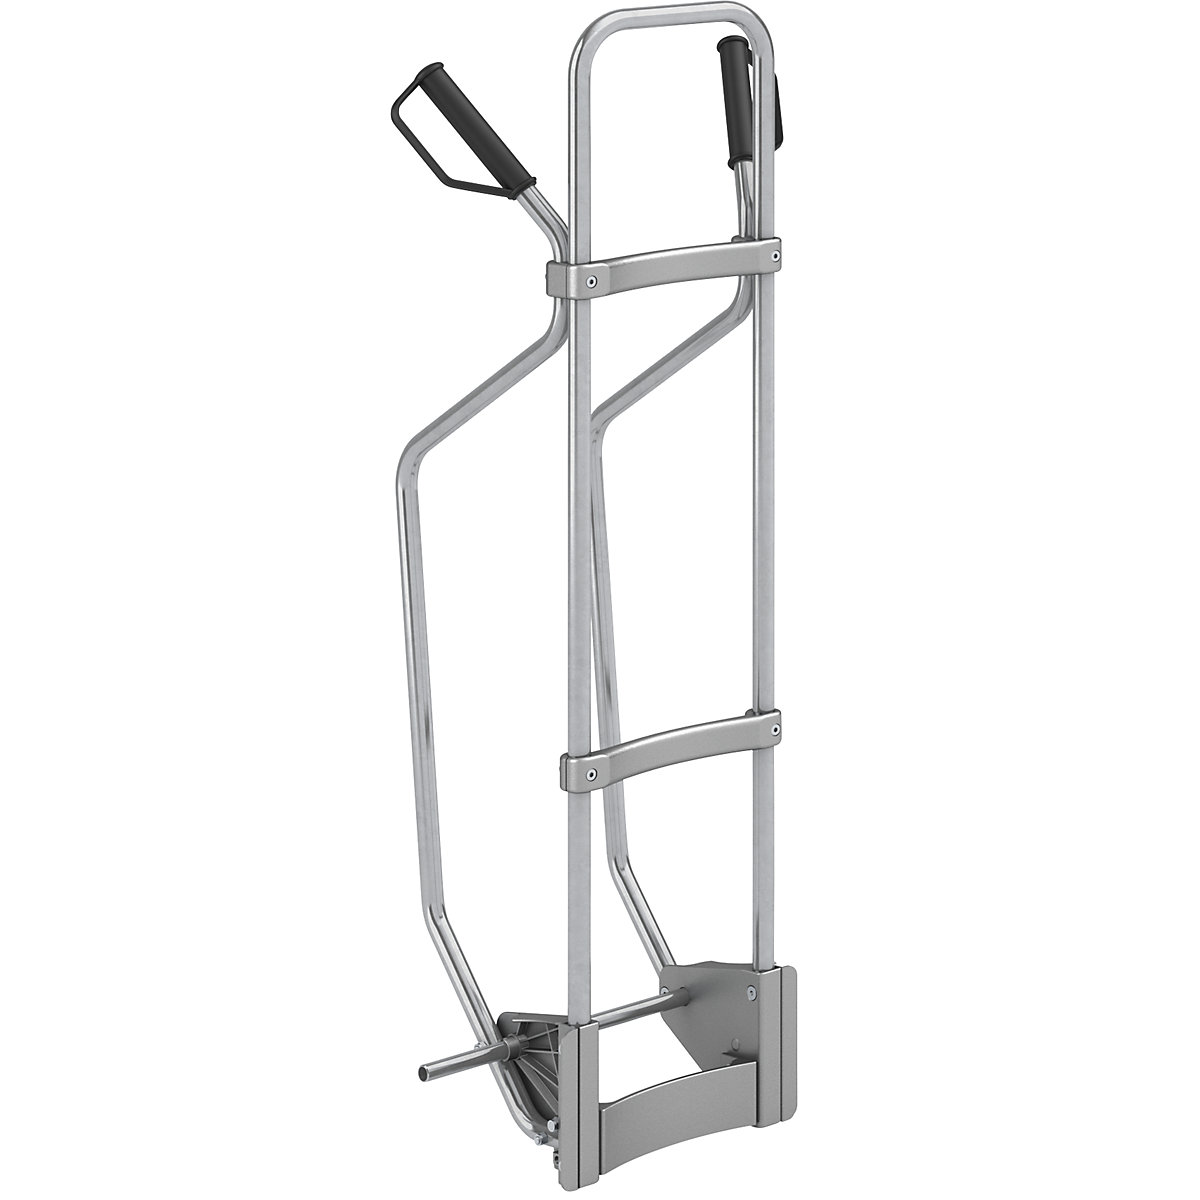 Sack truck, frame – eurokraft pro, max. load 200 kg, with glide runners, electrolytically zinc plated-4